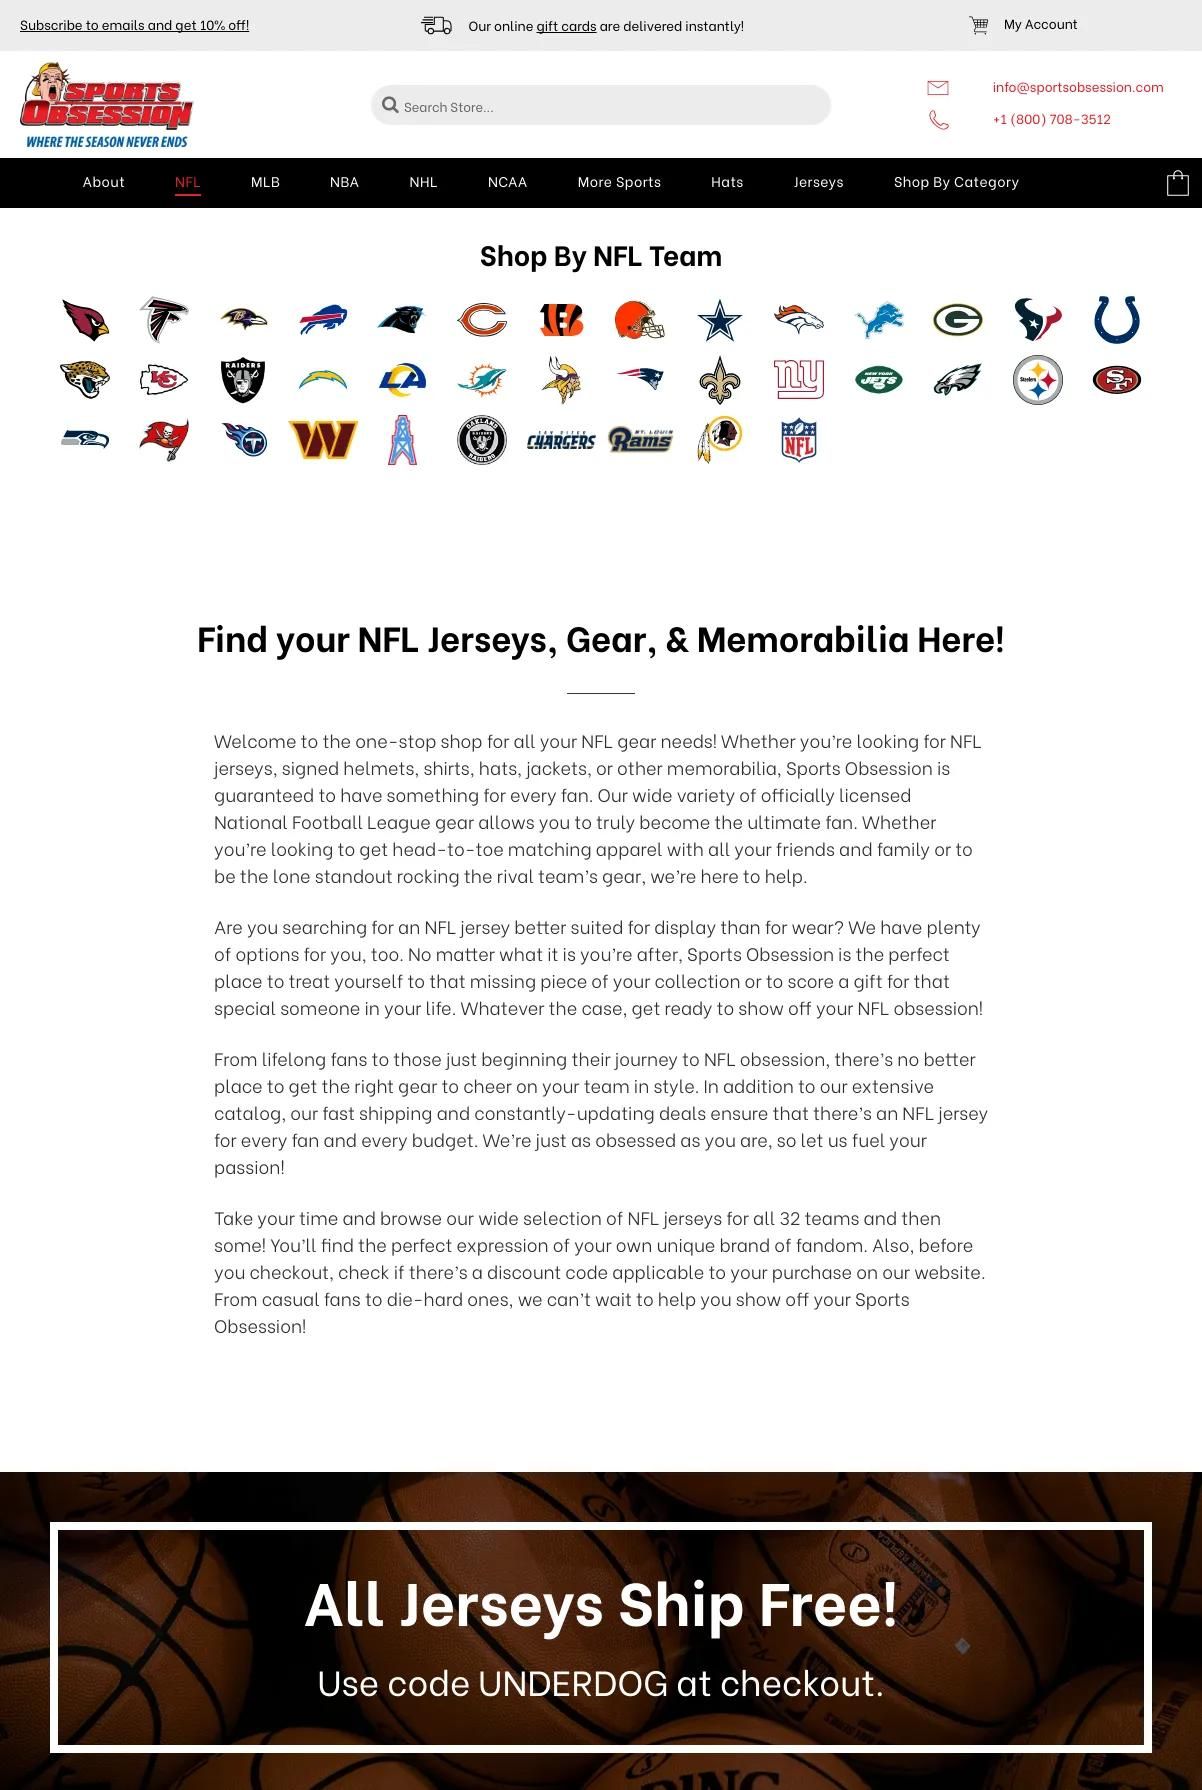 Screenshot 2 of Sports Obsession (Example Duda Website)